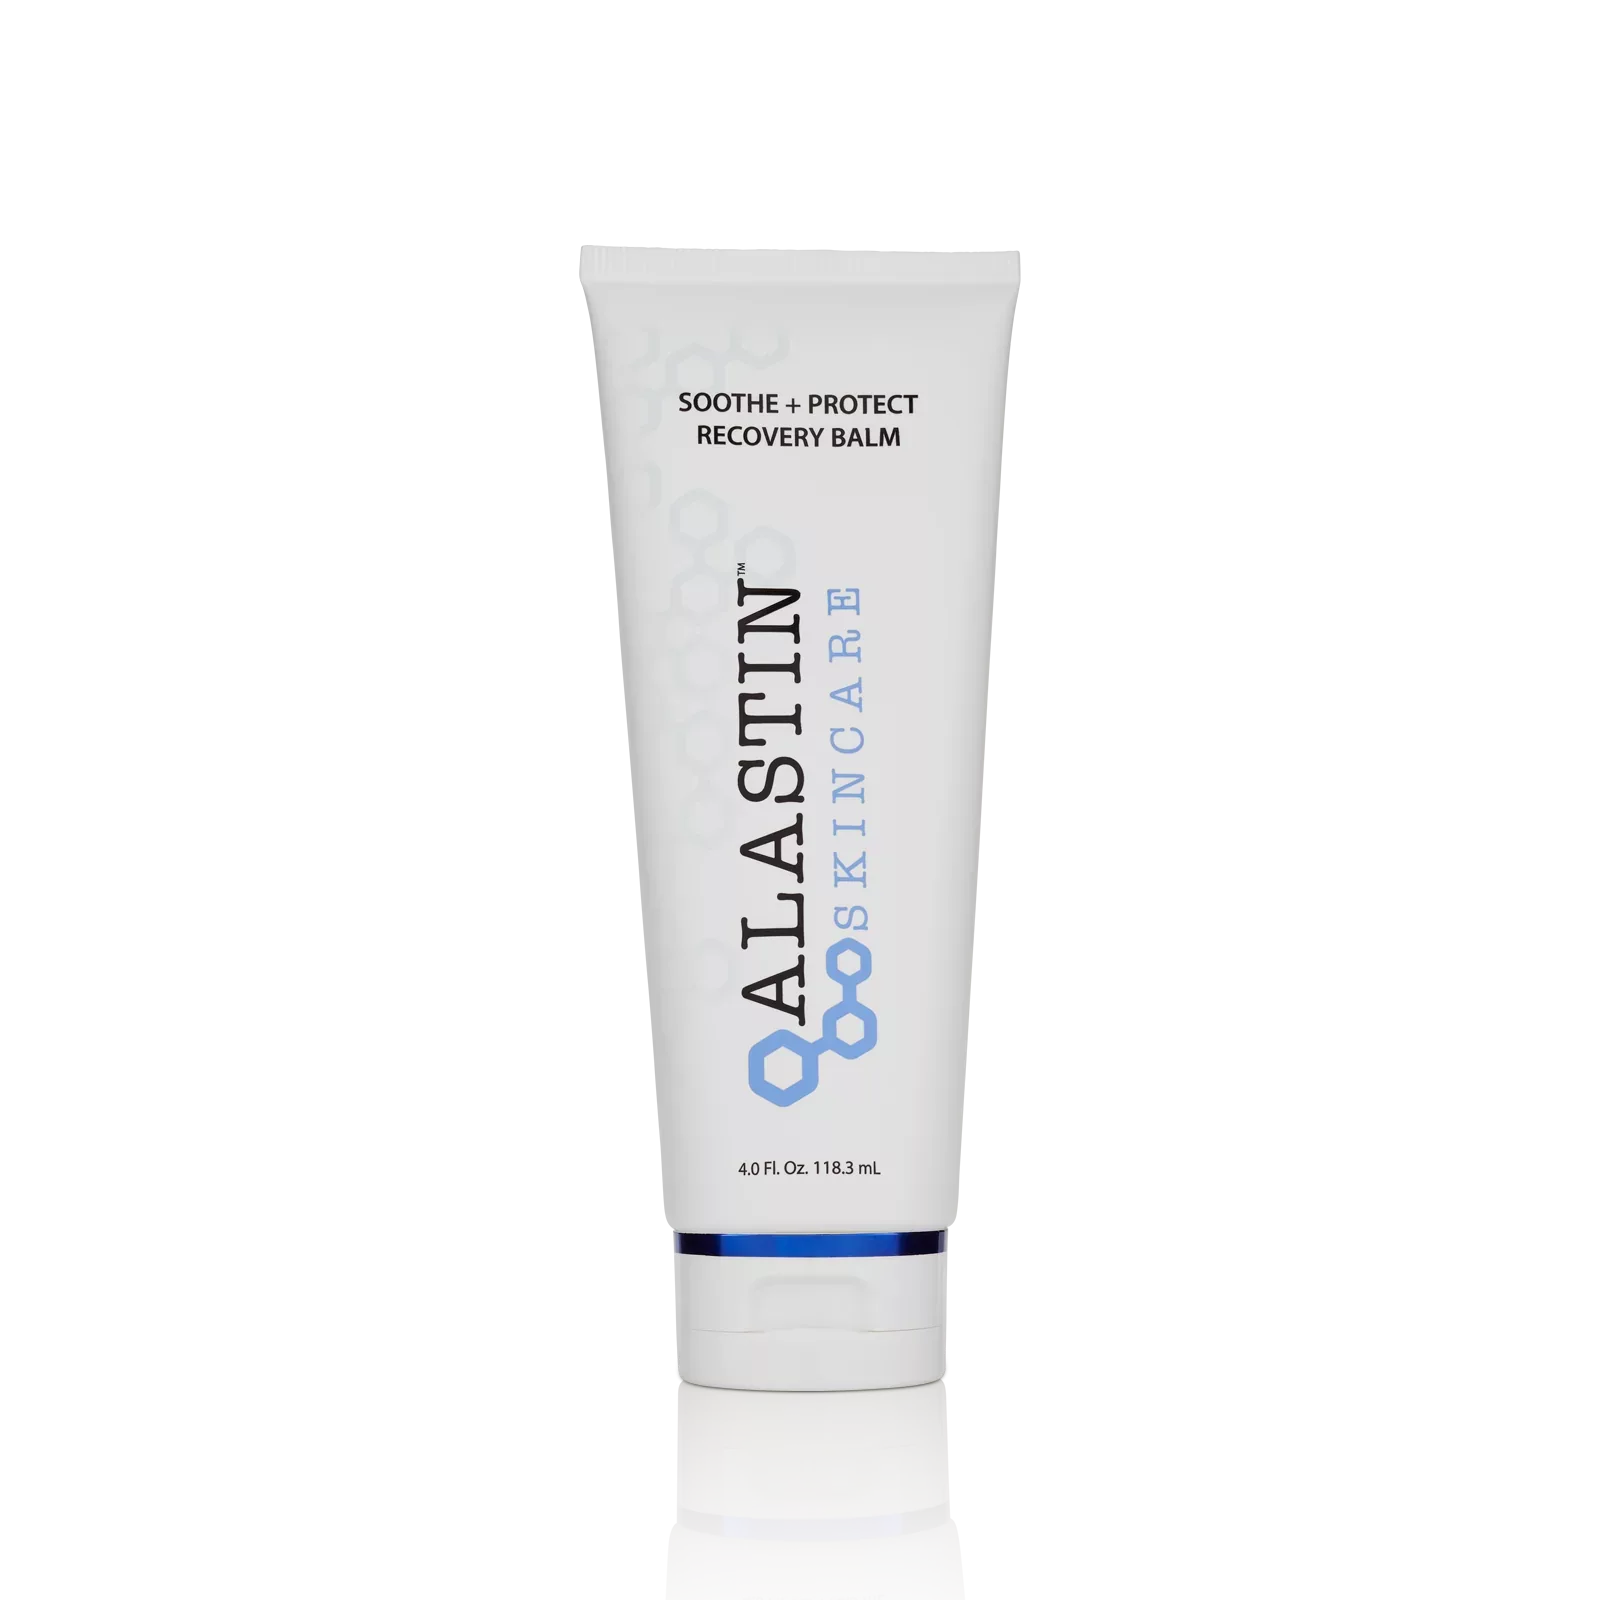 Soothe + Protect Recovery Balm Alastin